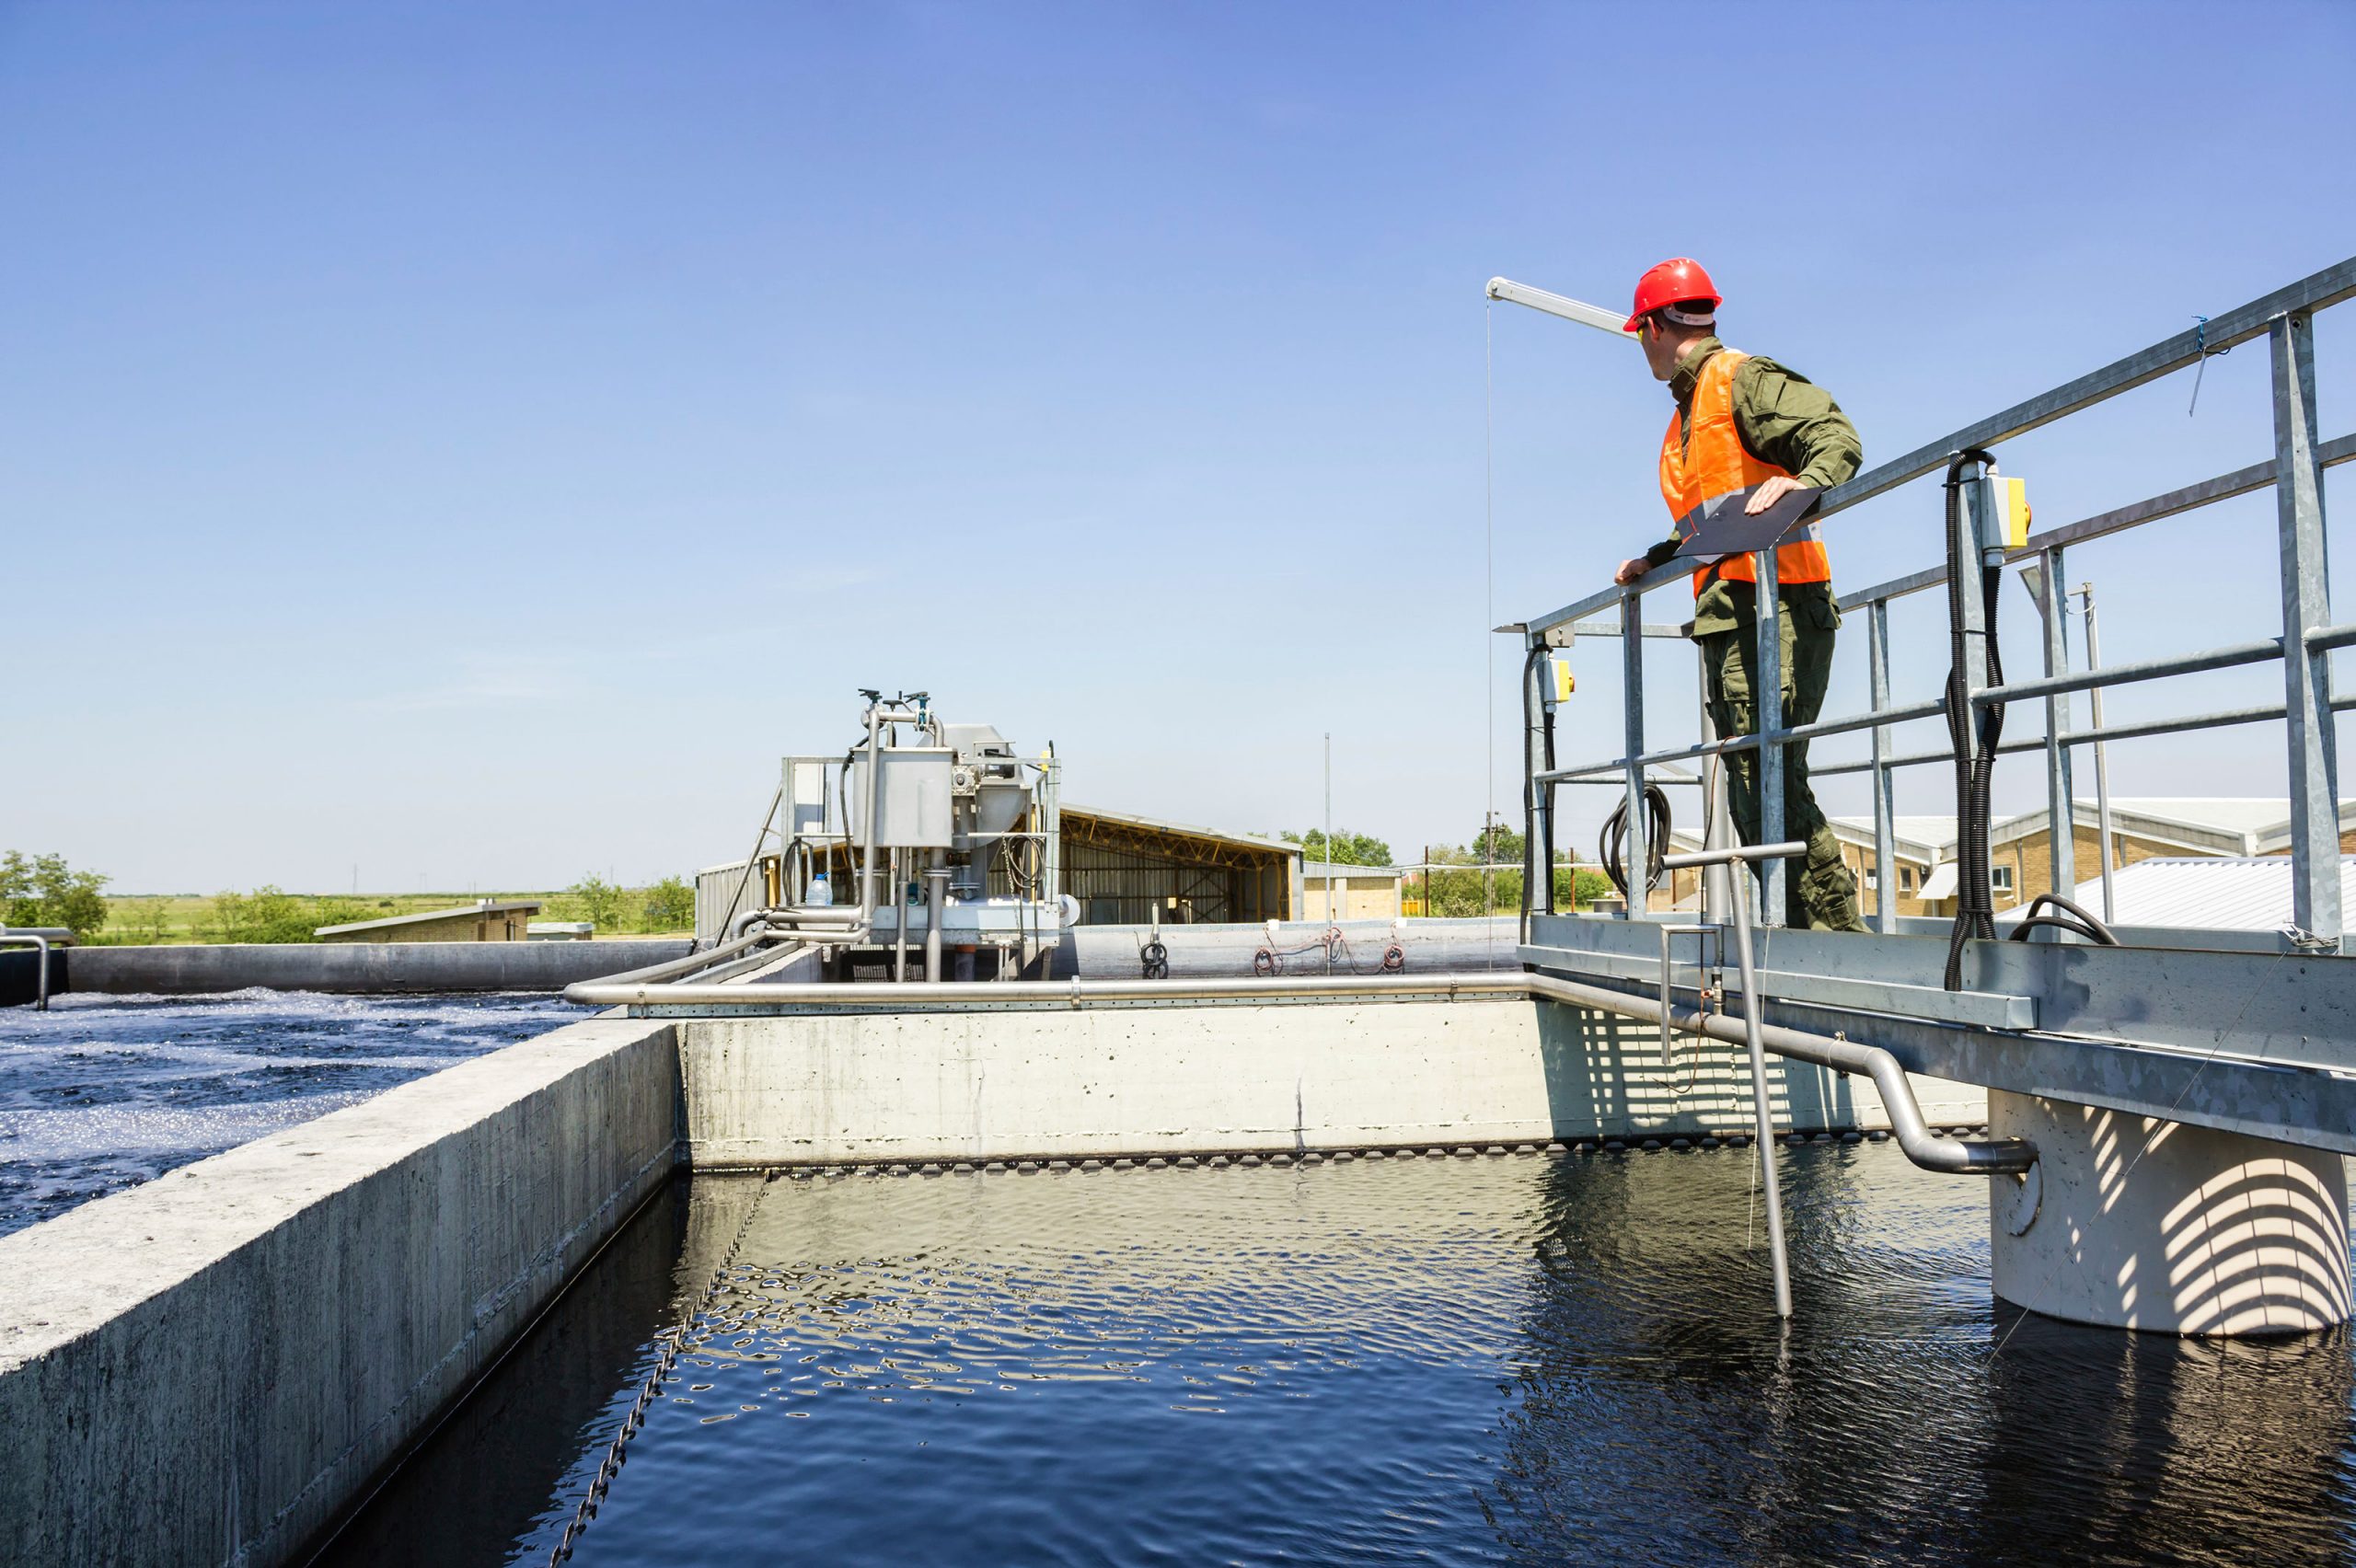 Helpful Hints to Water/Wastewater Certification